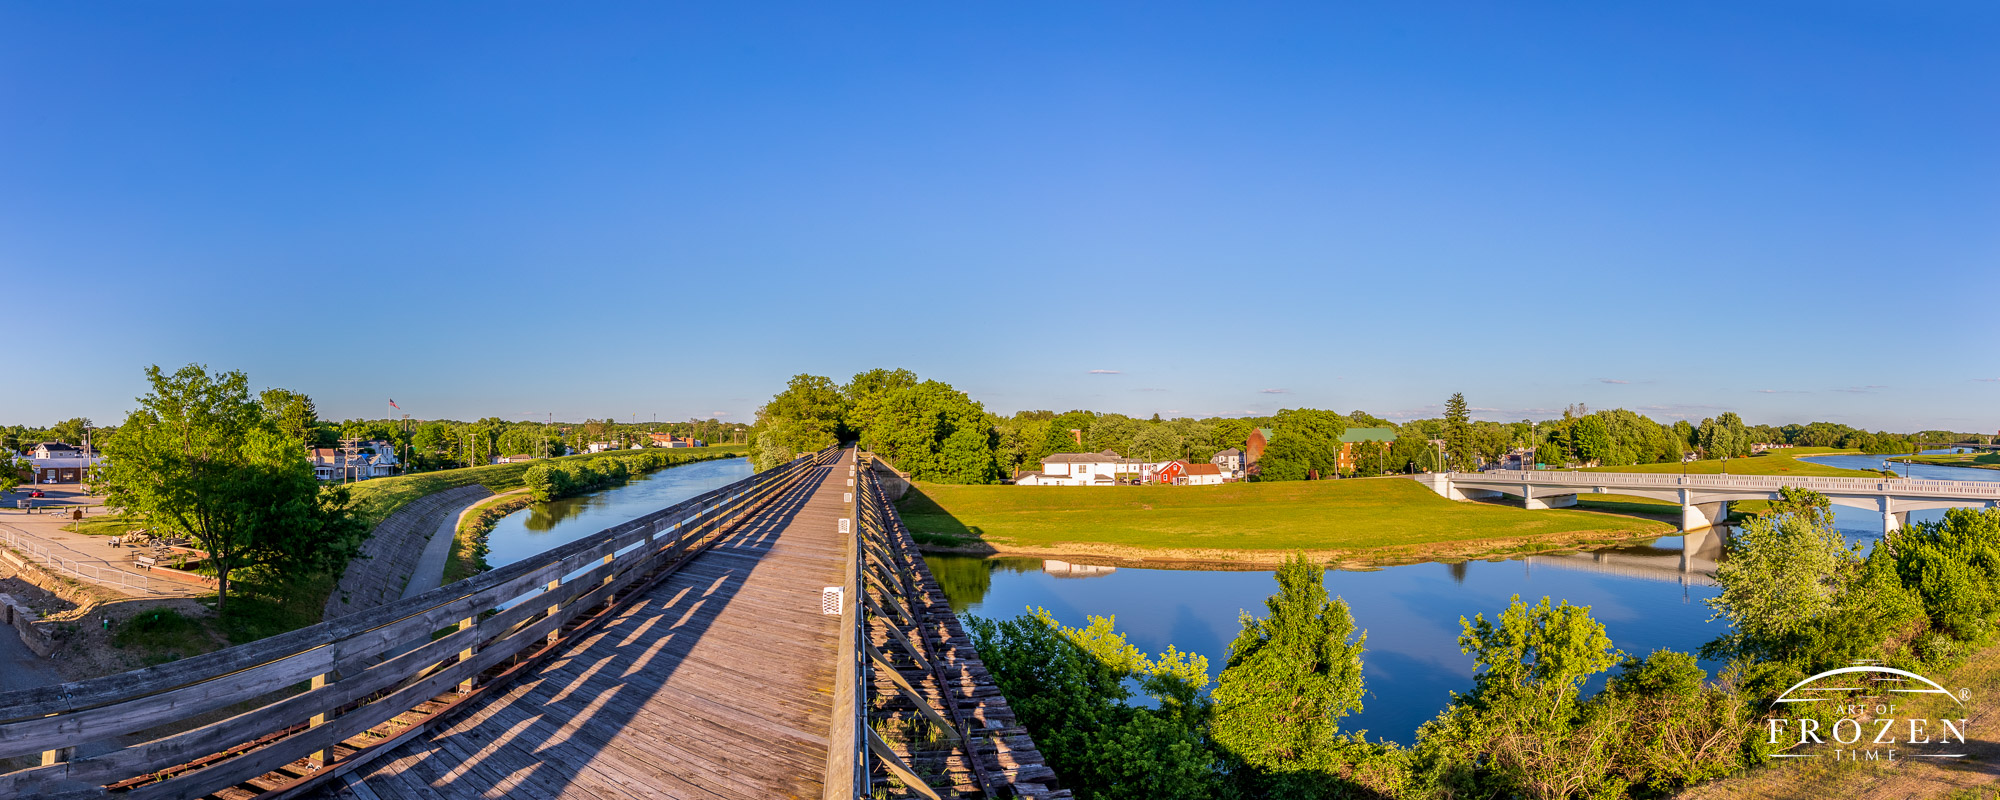 Panoramic view of Piqua Ohio’s Linear Park as it crosses the Great Miami River on a perfect June evening